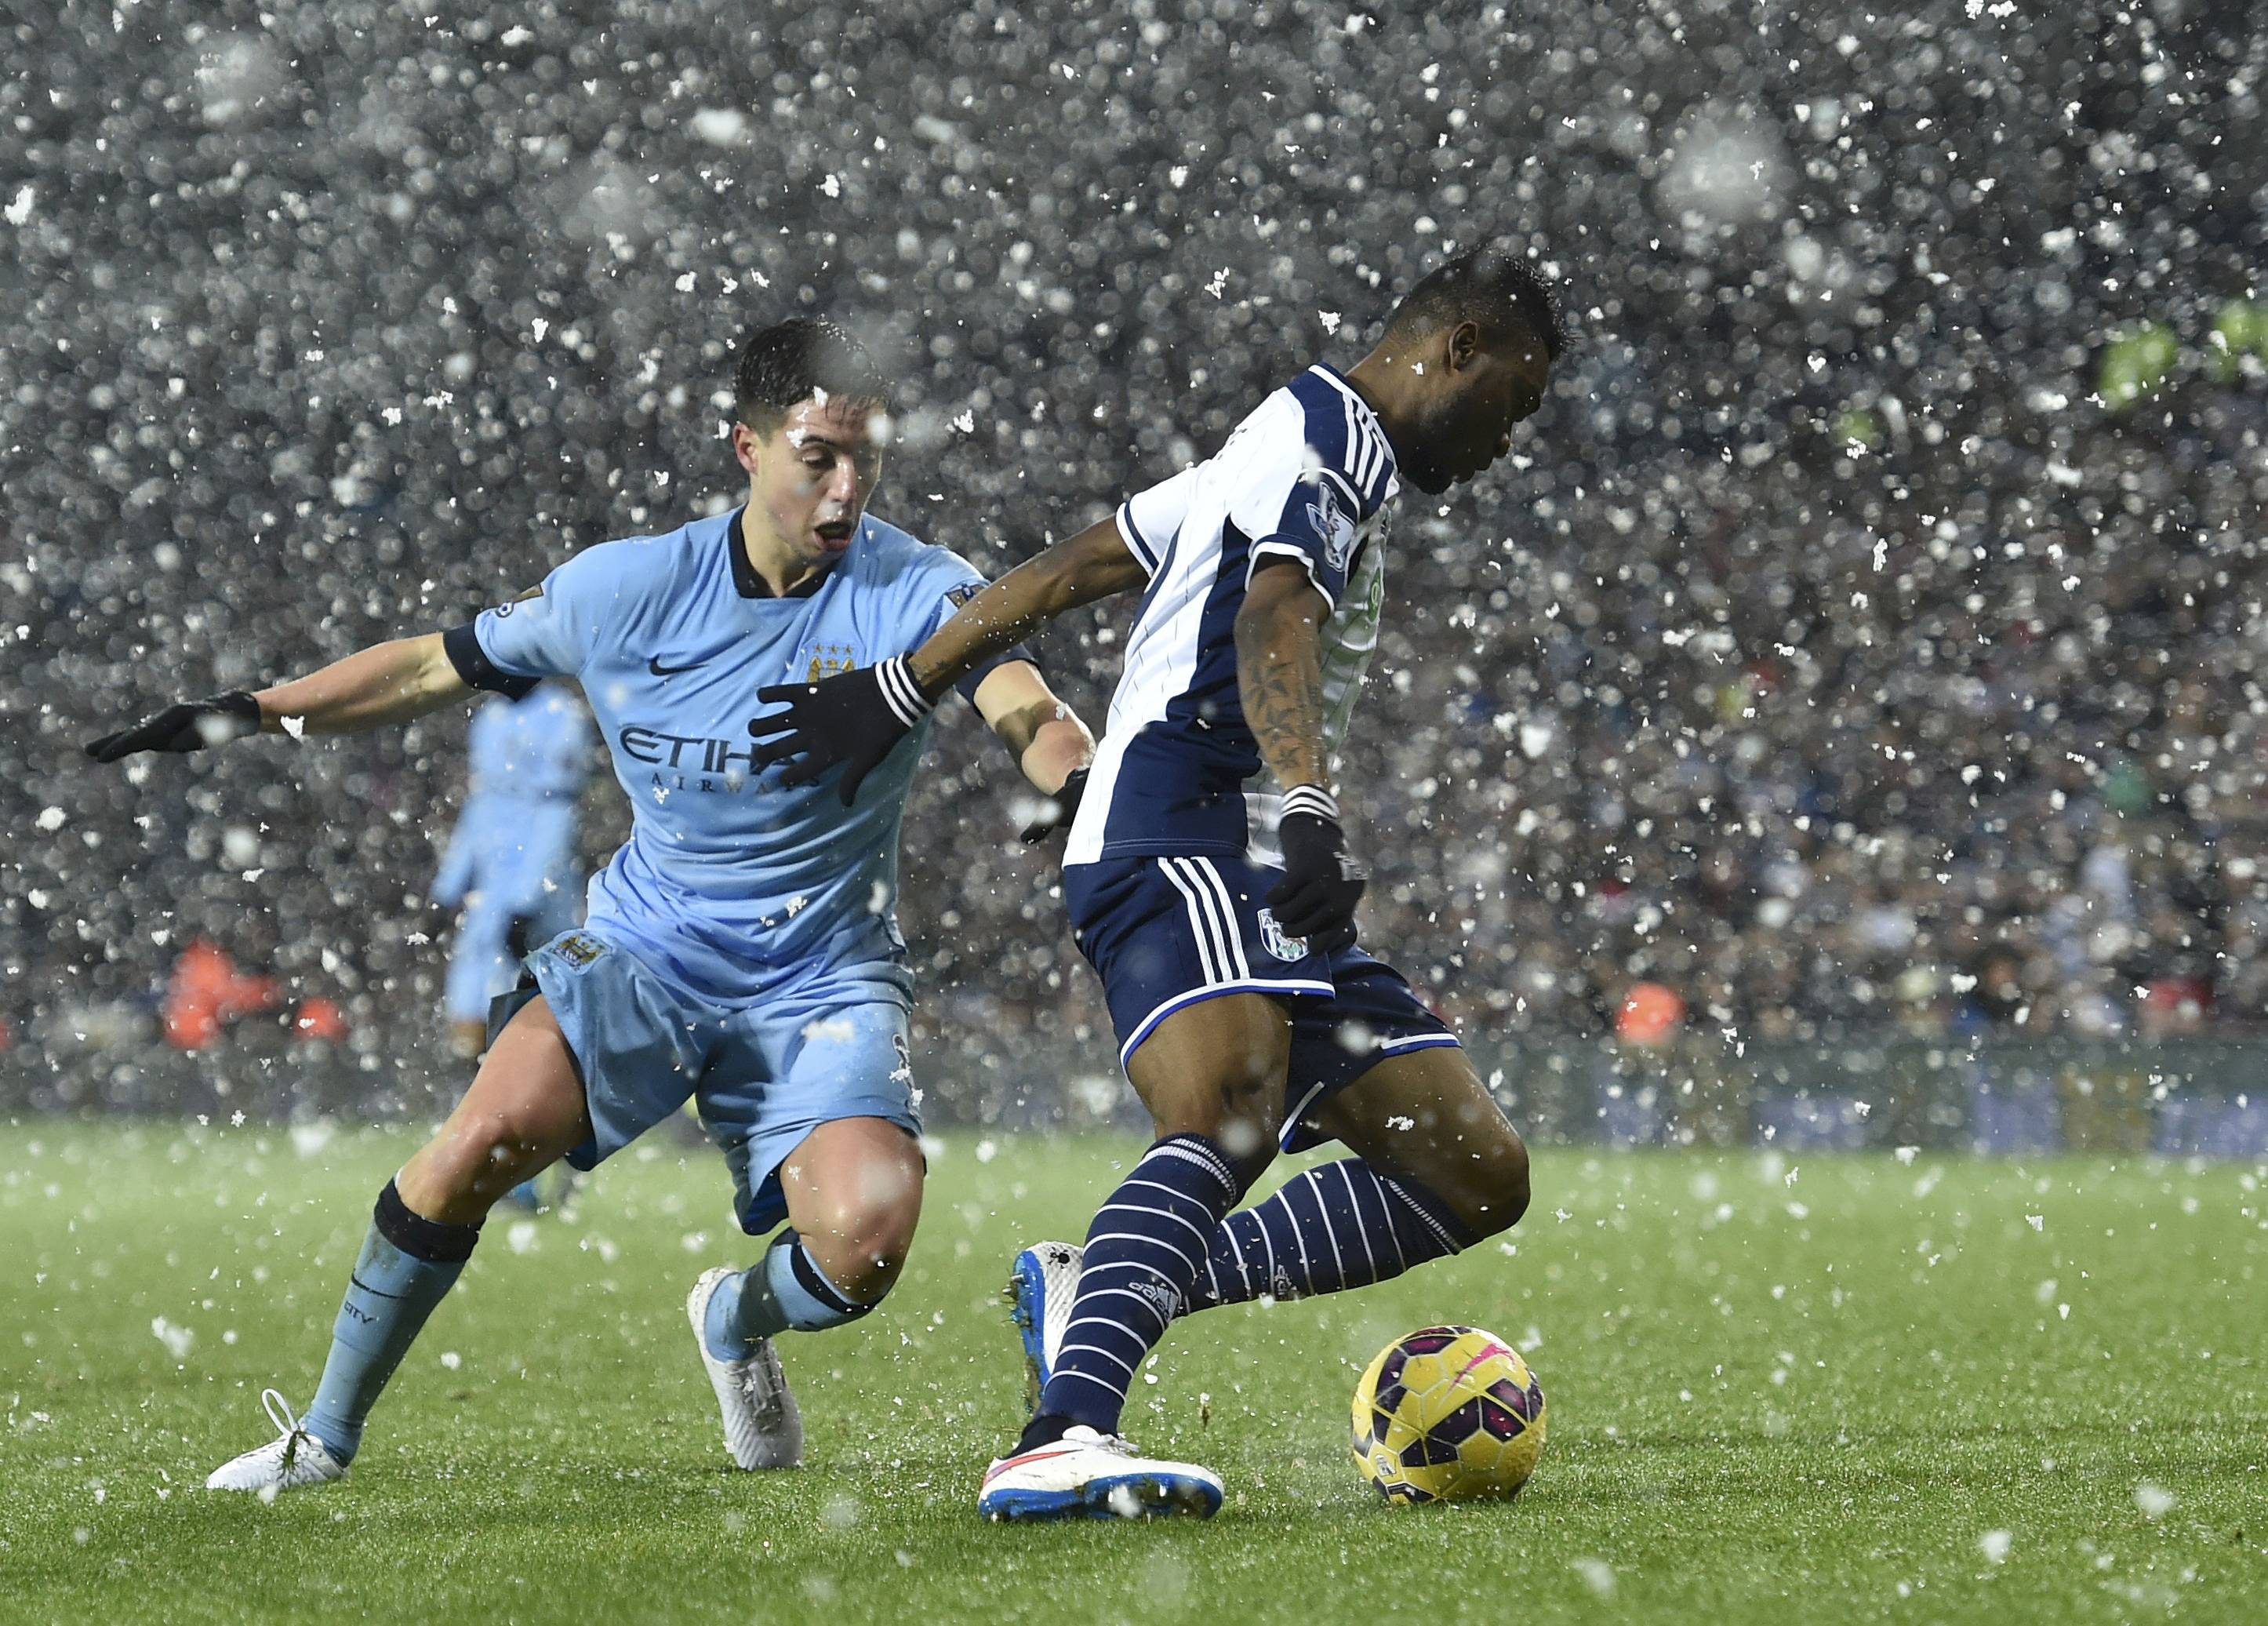 Manchester City's Samir Nasri challenges West Bromwich Albion's Brown Ideye during the English Premier League soccer match at The Hawthorns in West Bromwich